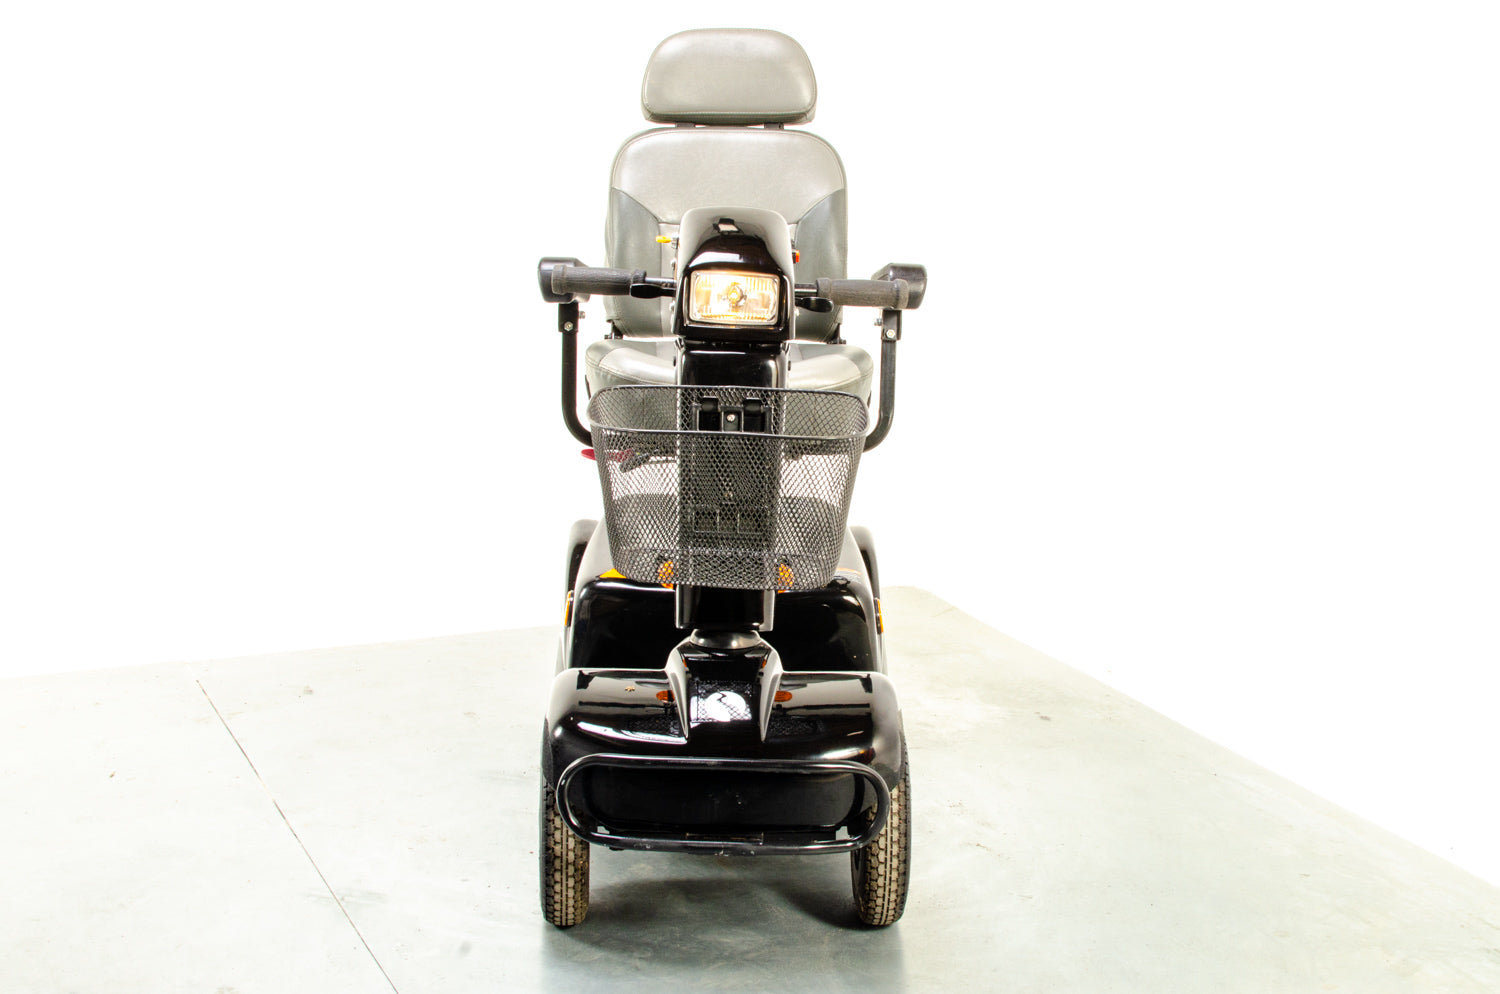 Rascal 388XL Used Electric Mobility Scooter 6mph Road Pavement Comfy